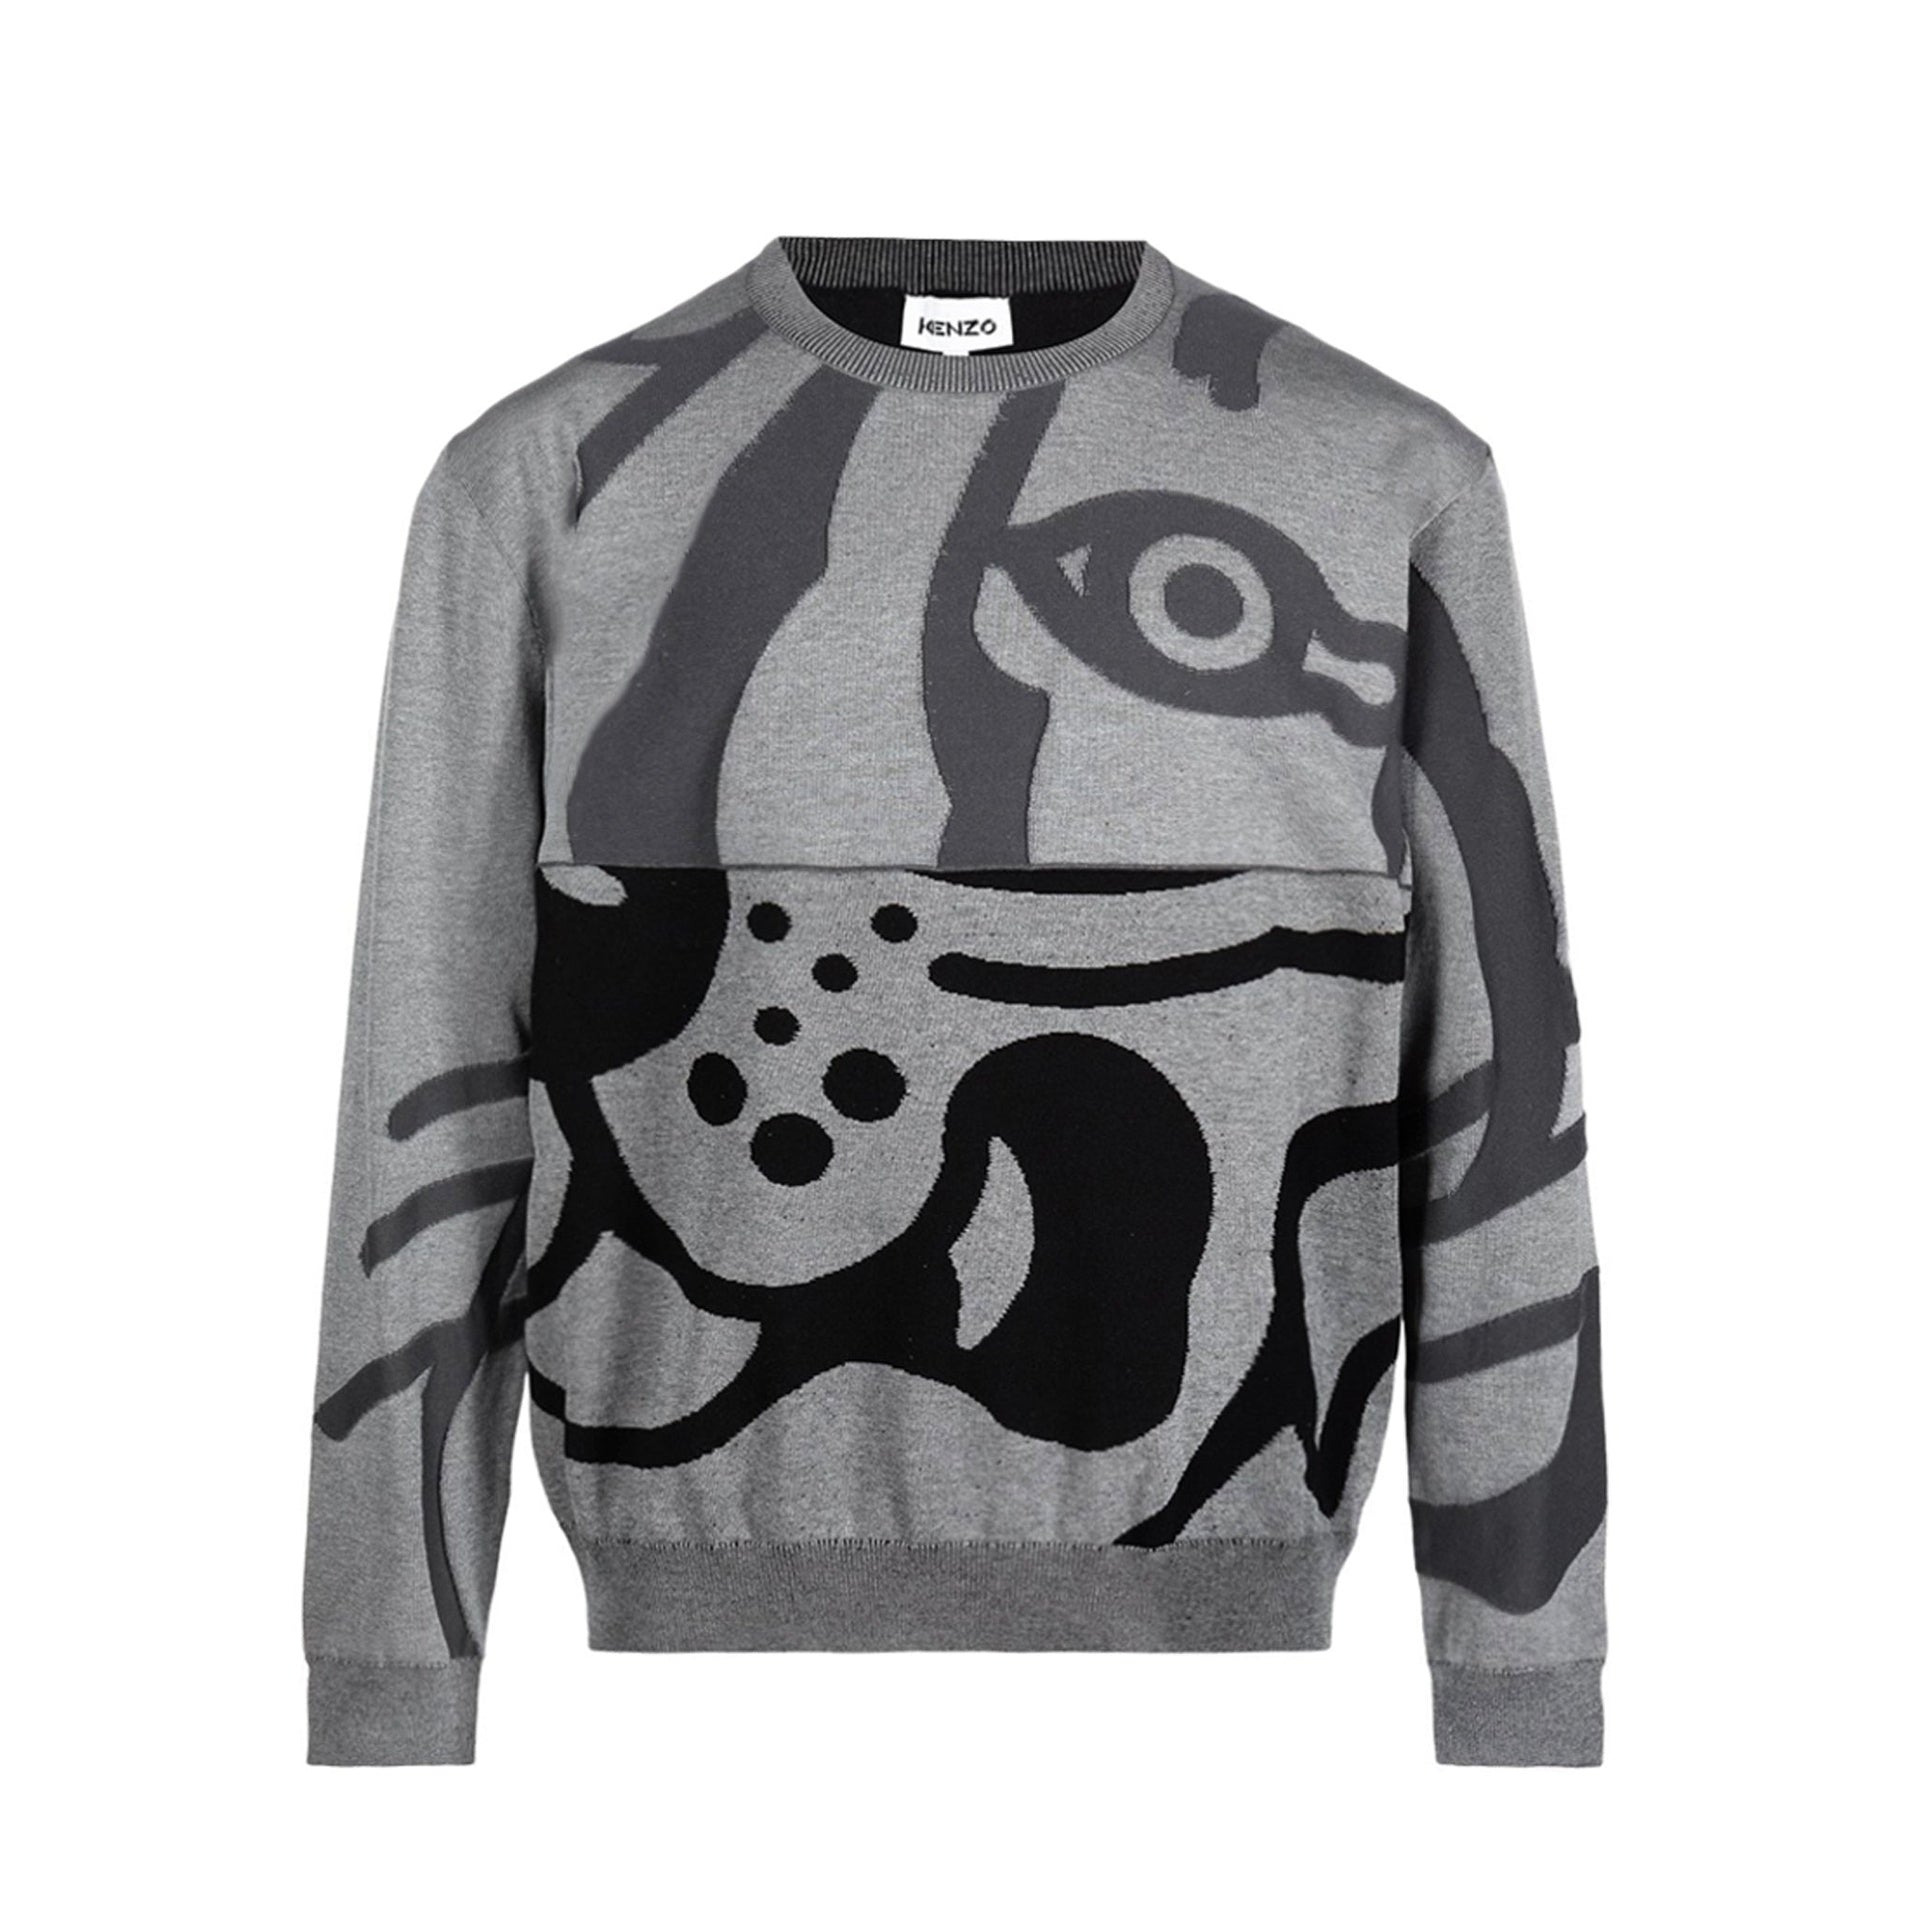 KENZO-OUTLET-SALE-Kenzo-Abstract-Tiger-Print-Sweatshirt-Shirts-GREY-M-ARCHIVE-COLLECTION.jpg